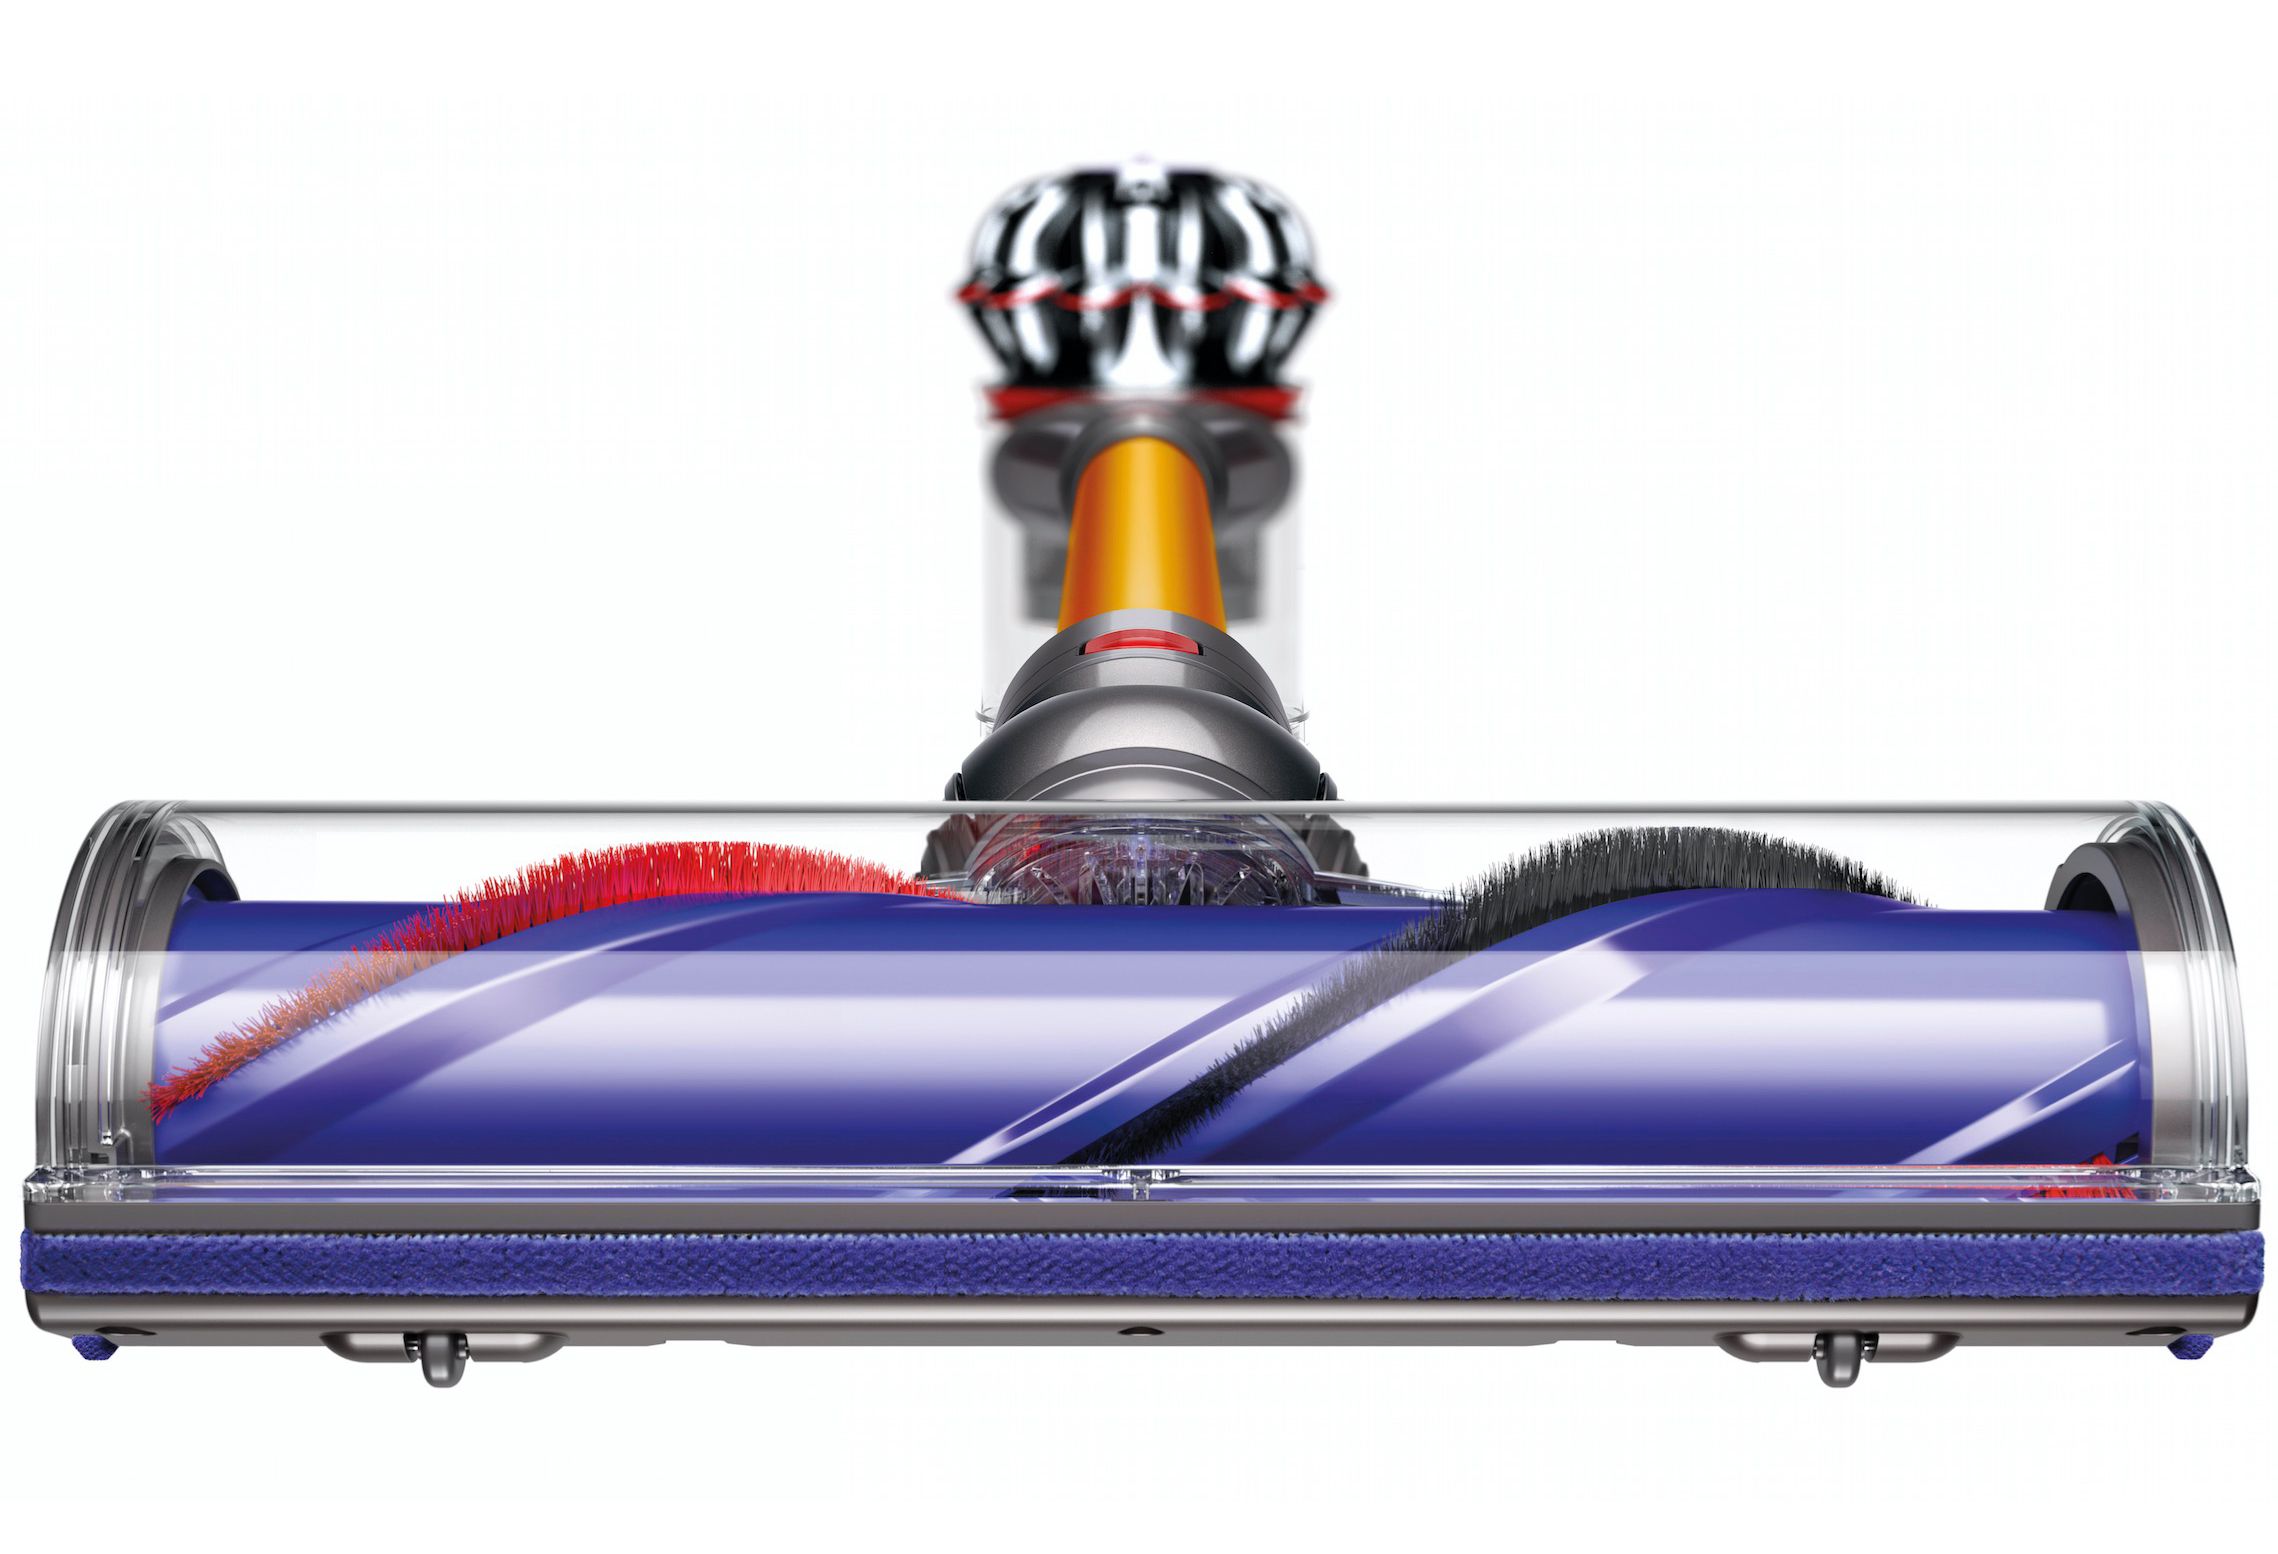 dyson s new v8 cordless vacuum has double the battery life of predecessors image 1